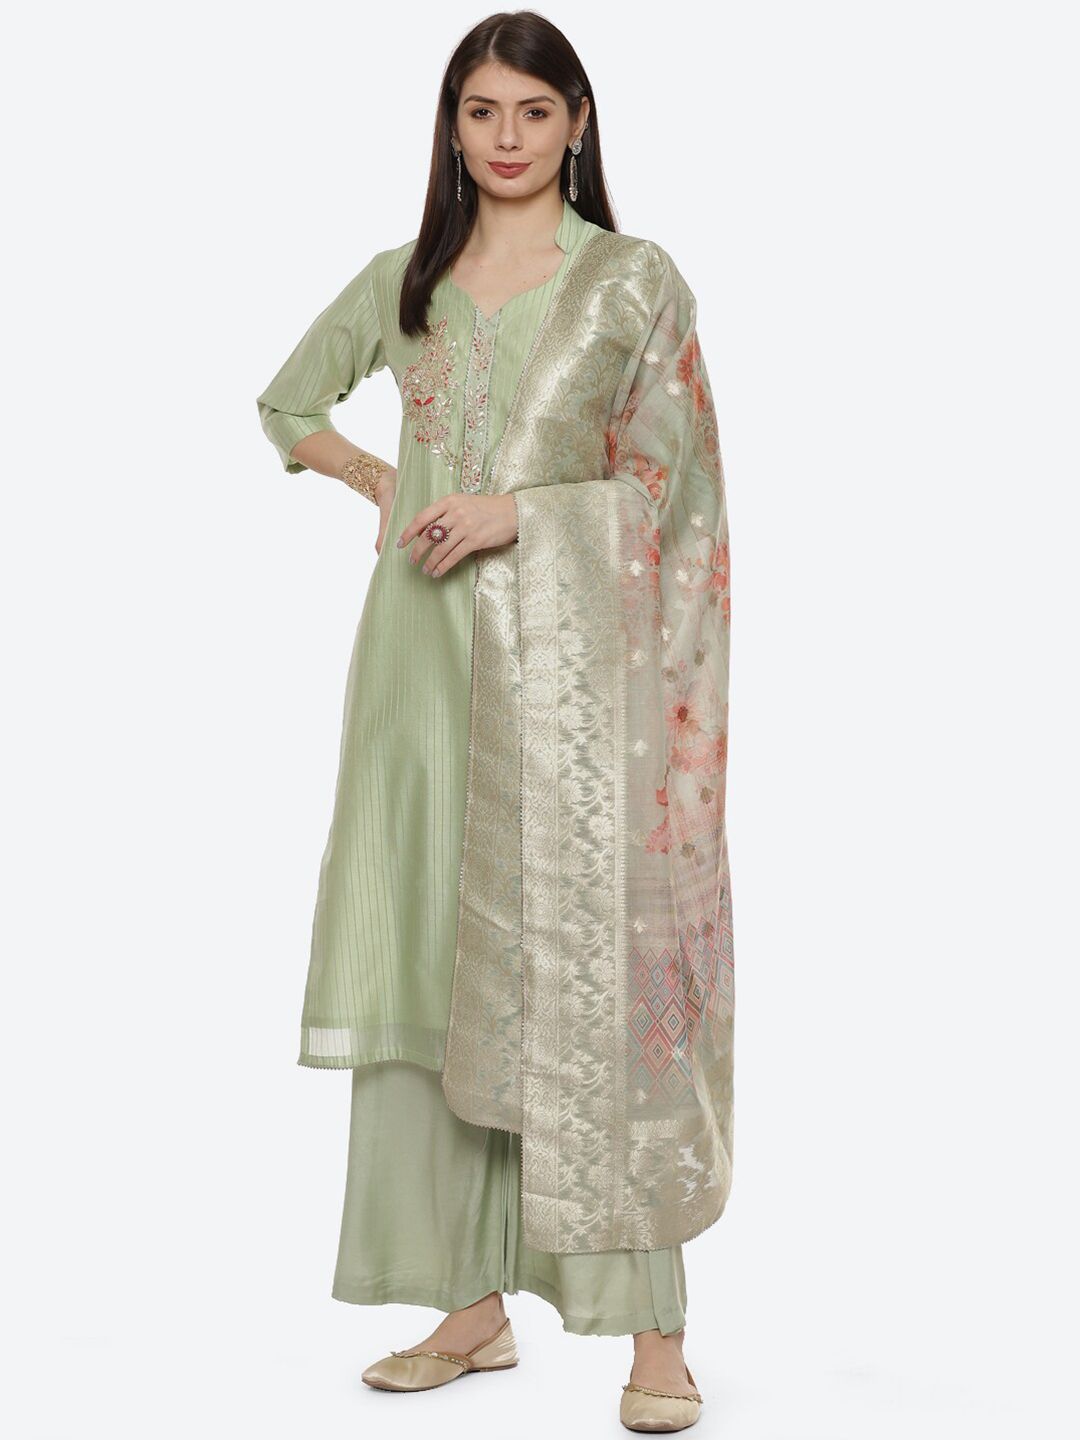 Biba Green & Pink Embroidered Unstitched Dress Material Price in India